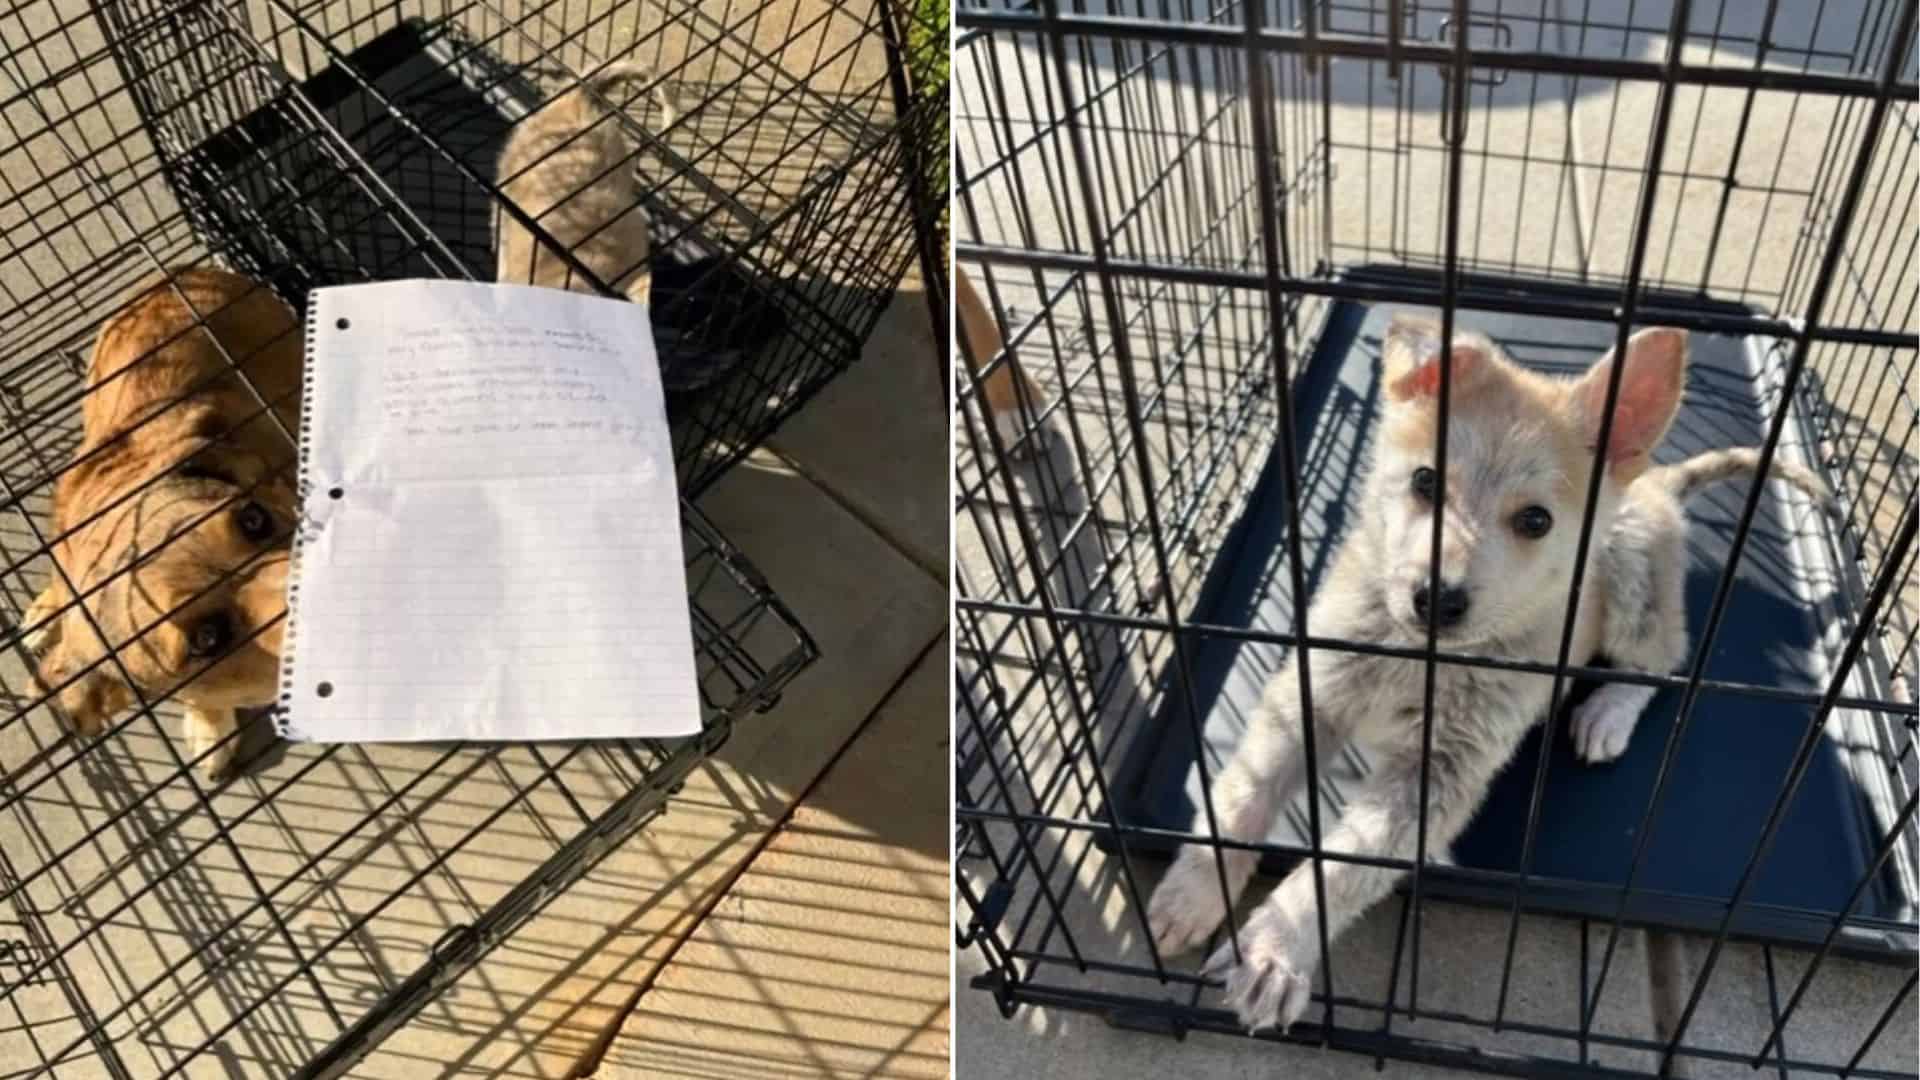 Everyone Was Shocked When They Saw A Pair Of Puppies Left In Kennels With Only A Note